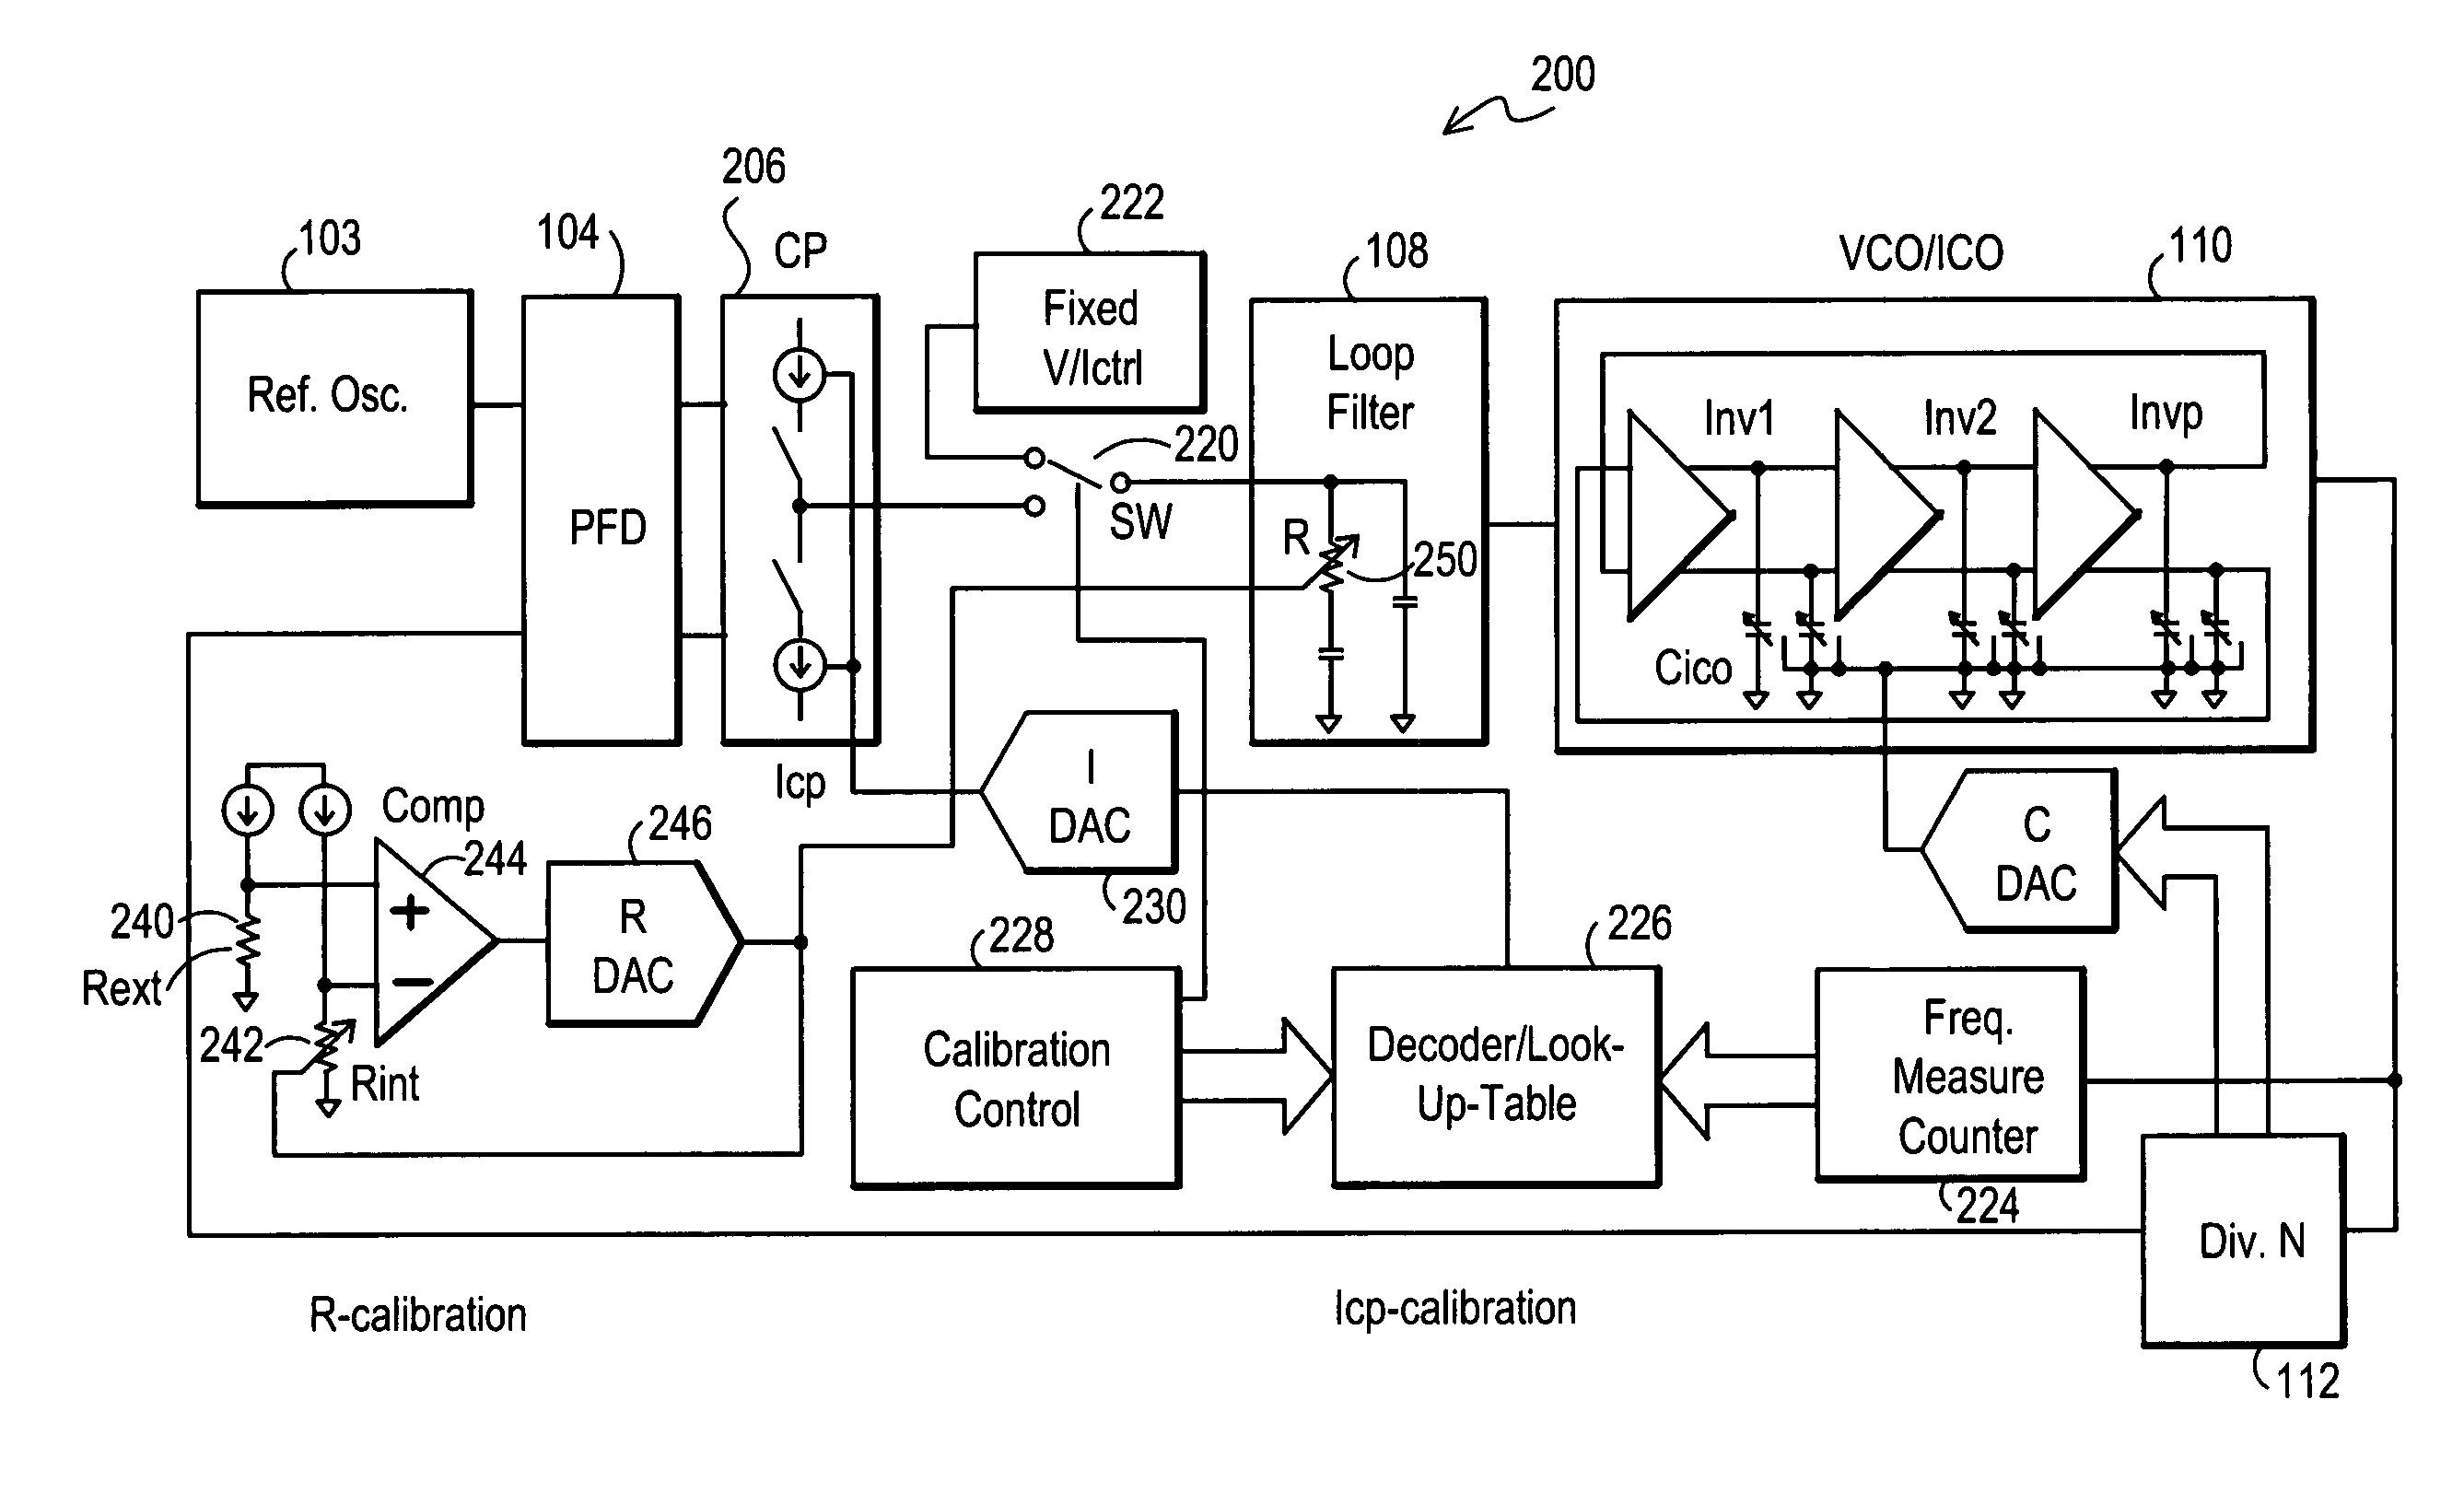 Method and apparatus to achieve a process, temperature and divider modulus independent PLL loop bandwidth and damping factor using open-loop calibration techniques